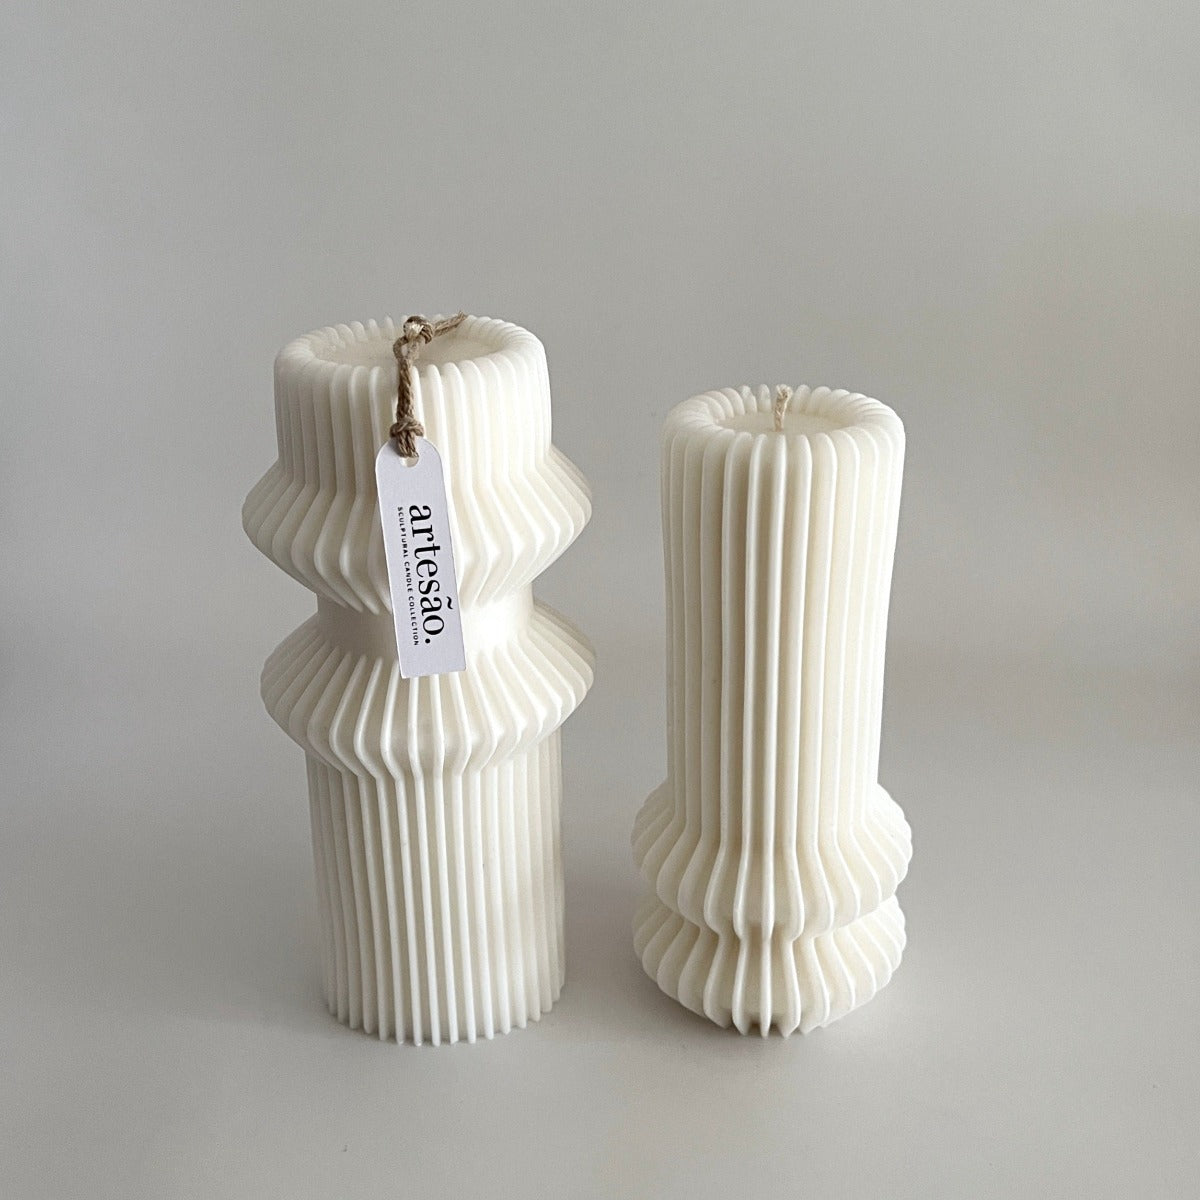 FREYJA + FRIDA nordic candle set. Luxury sculptural candles made by Artesao Candles in Sydney